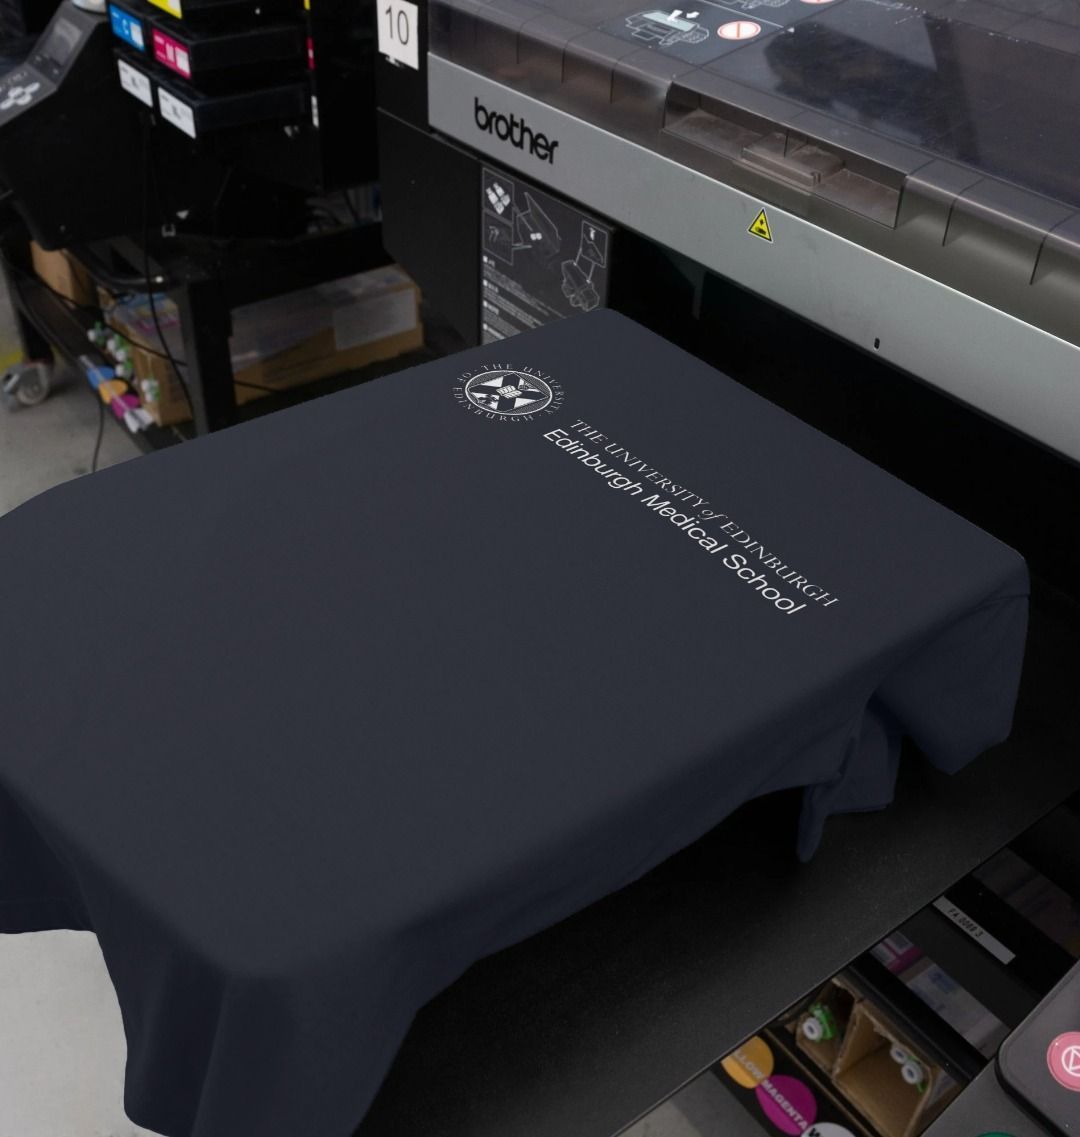 Our Edinburgh Medical School T- shirt being printed by our print on demand partner, teemill